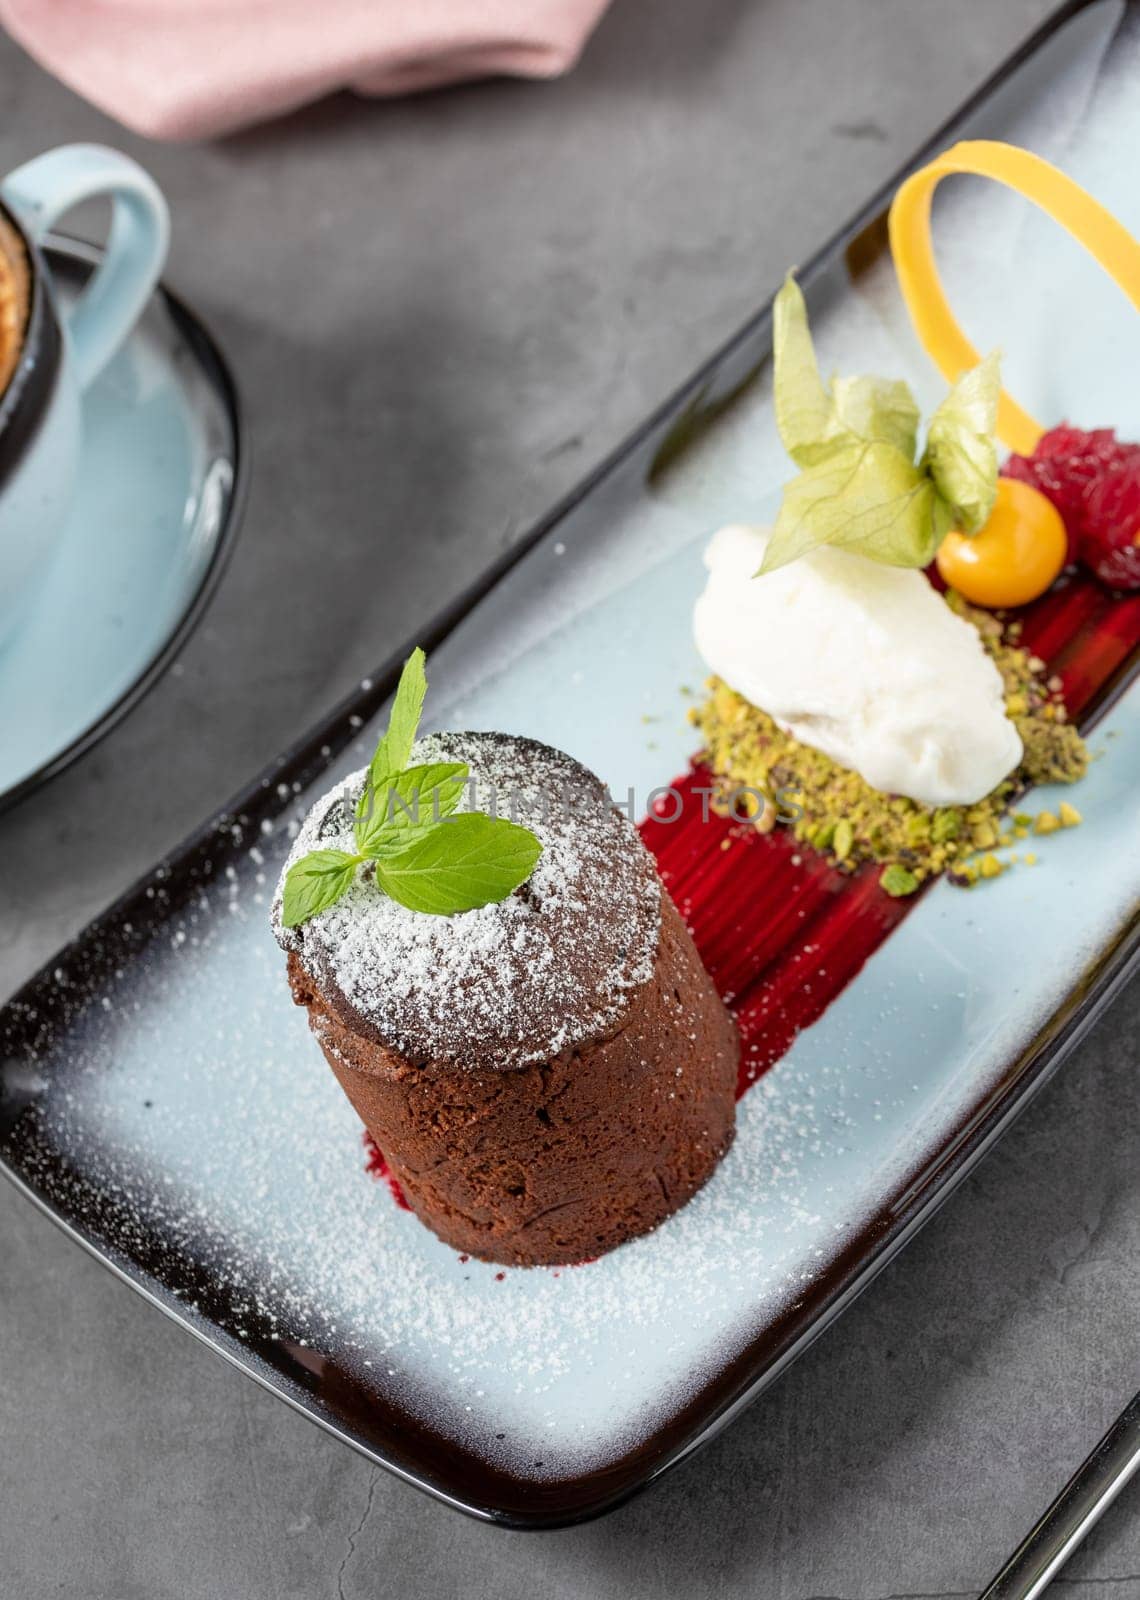 Chocolate souffle with ice cream served in a fine dining restaurant by Sonat